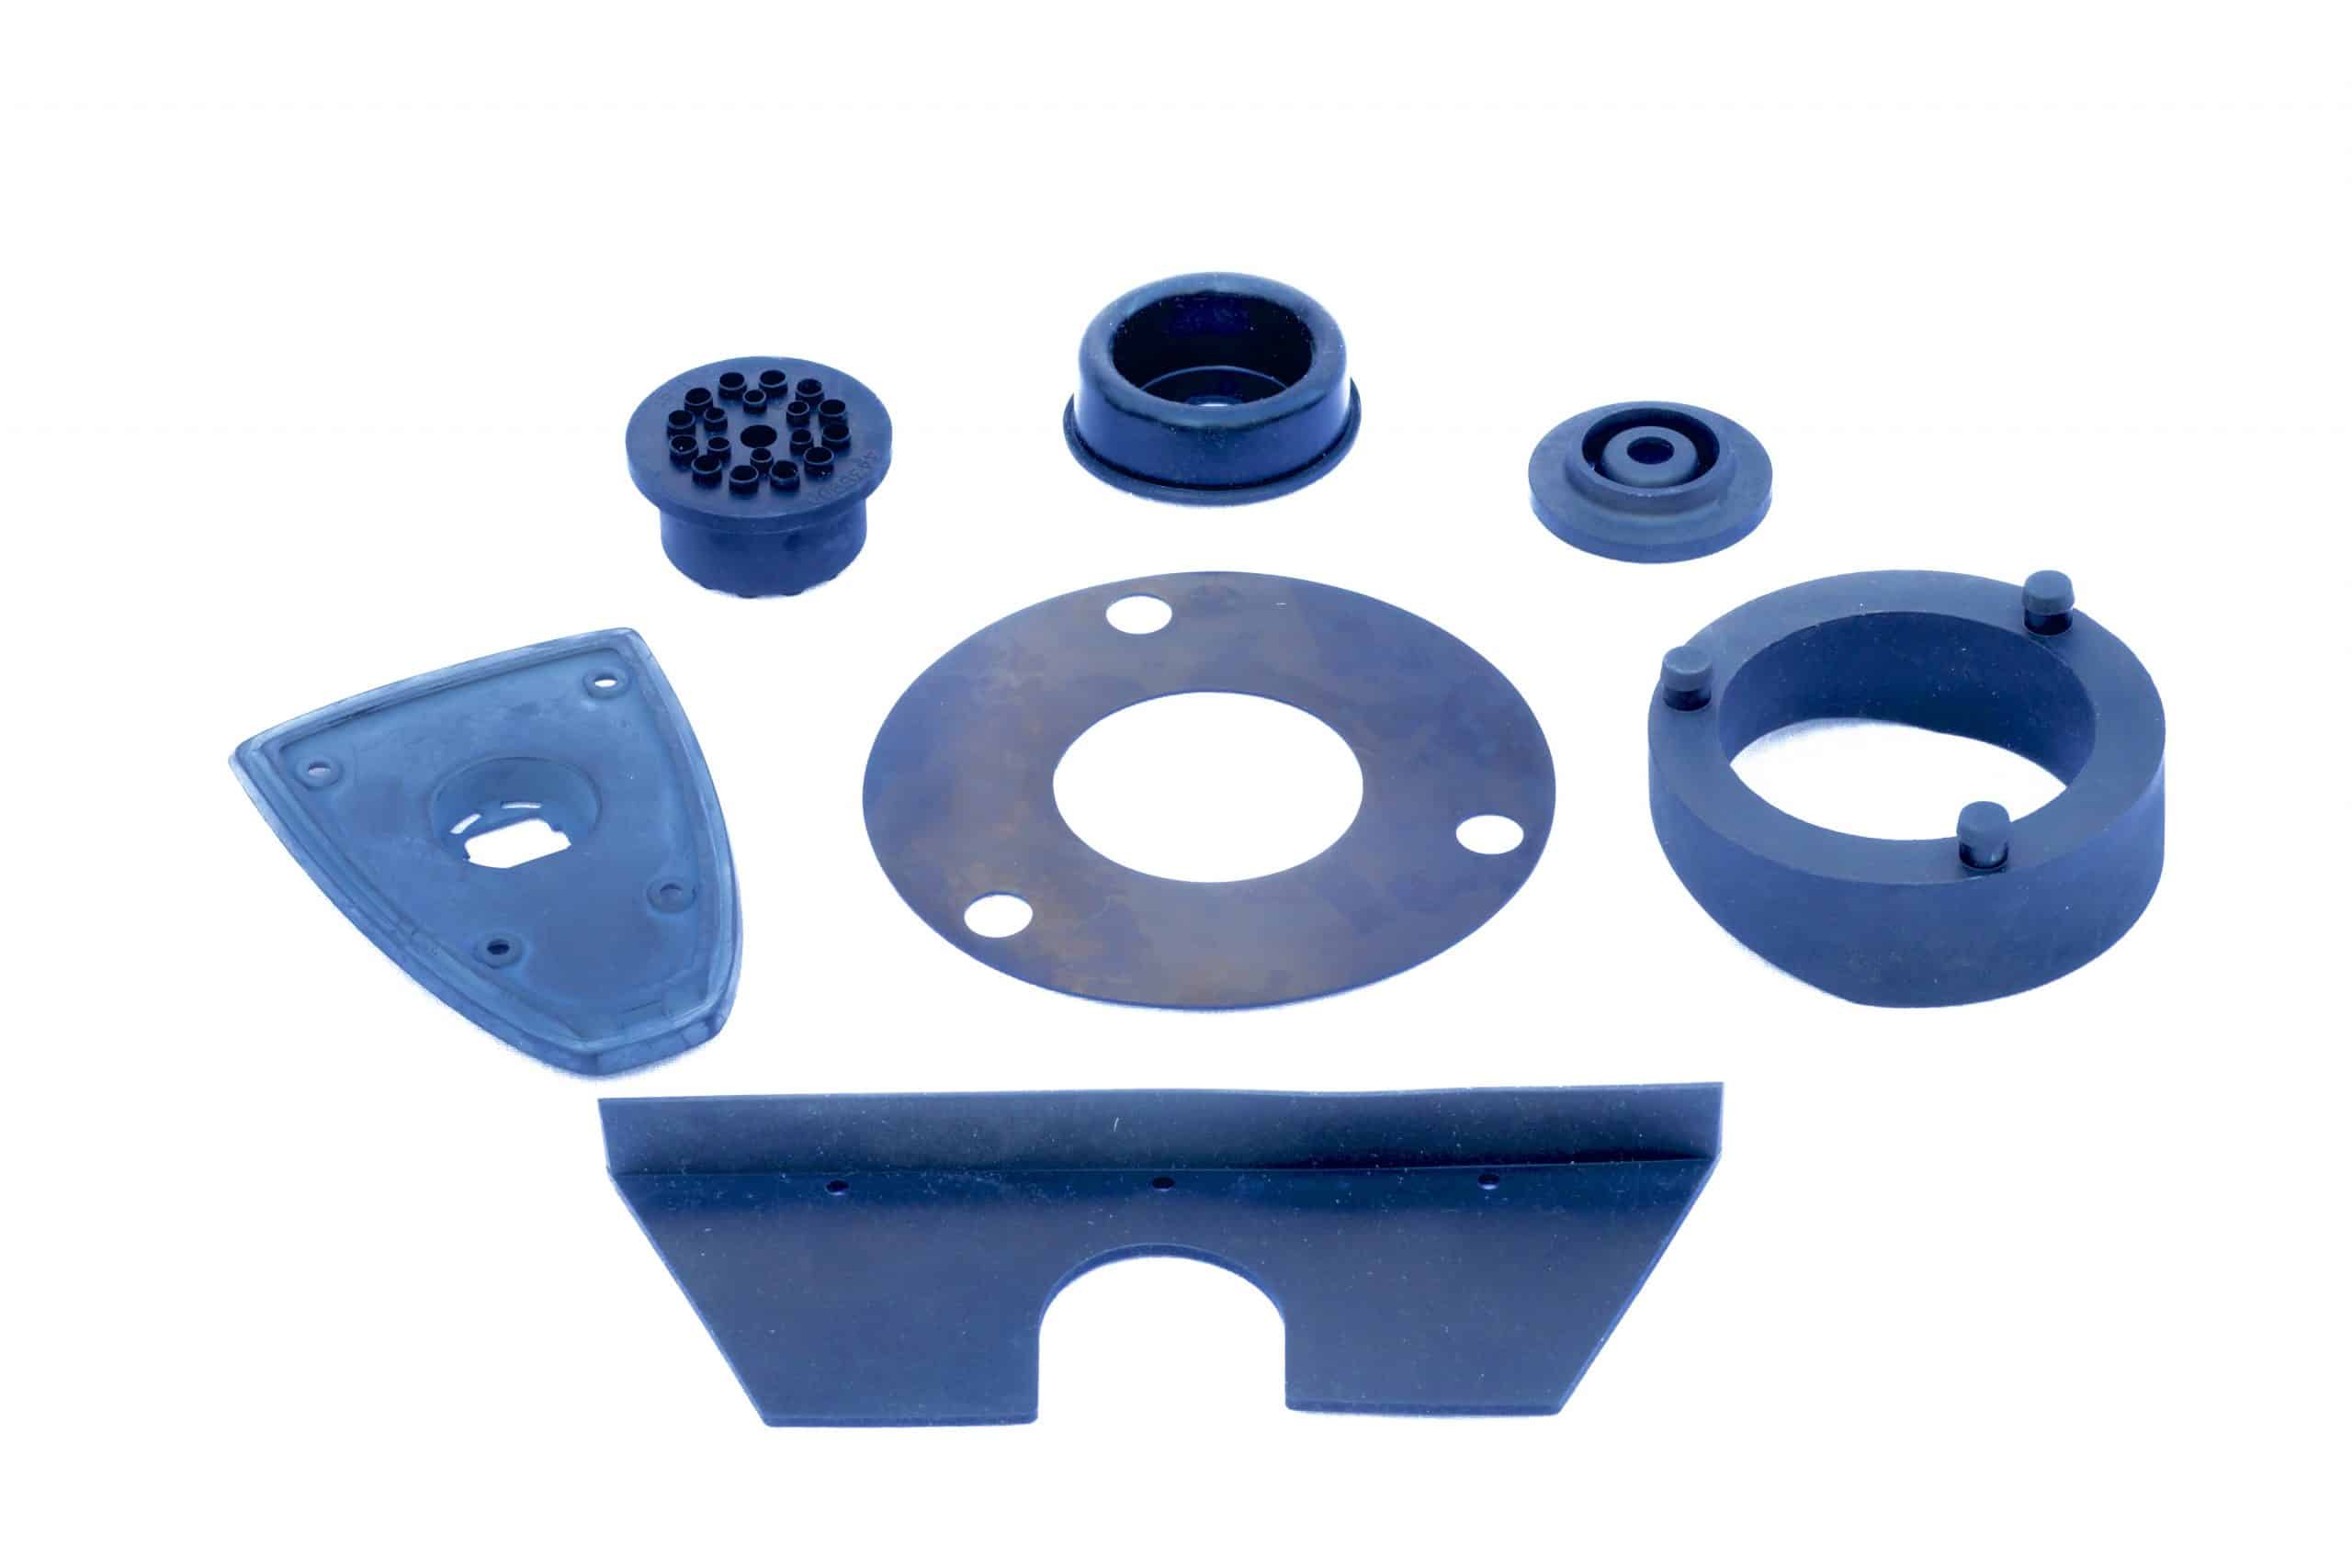 Various molded nitrile, neoprene, and natural rubber parts.